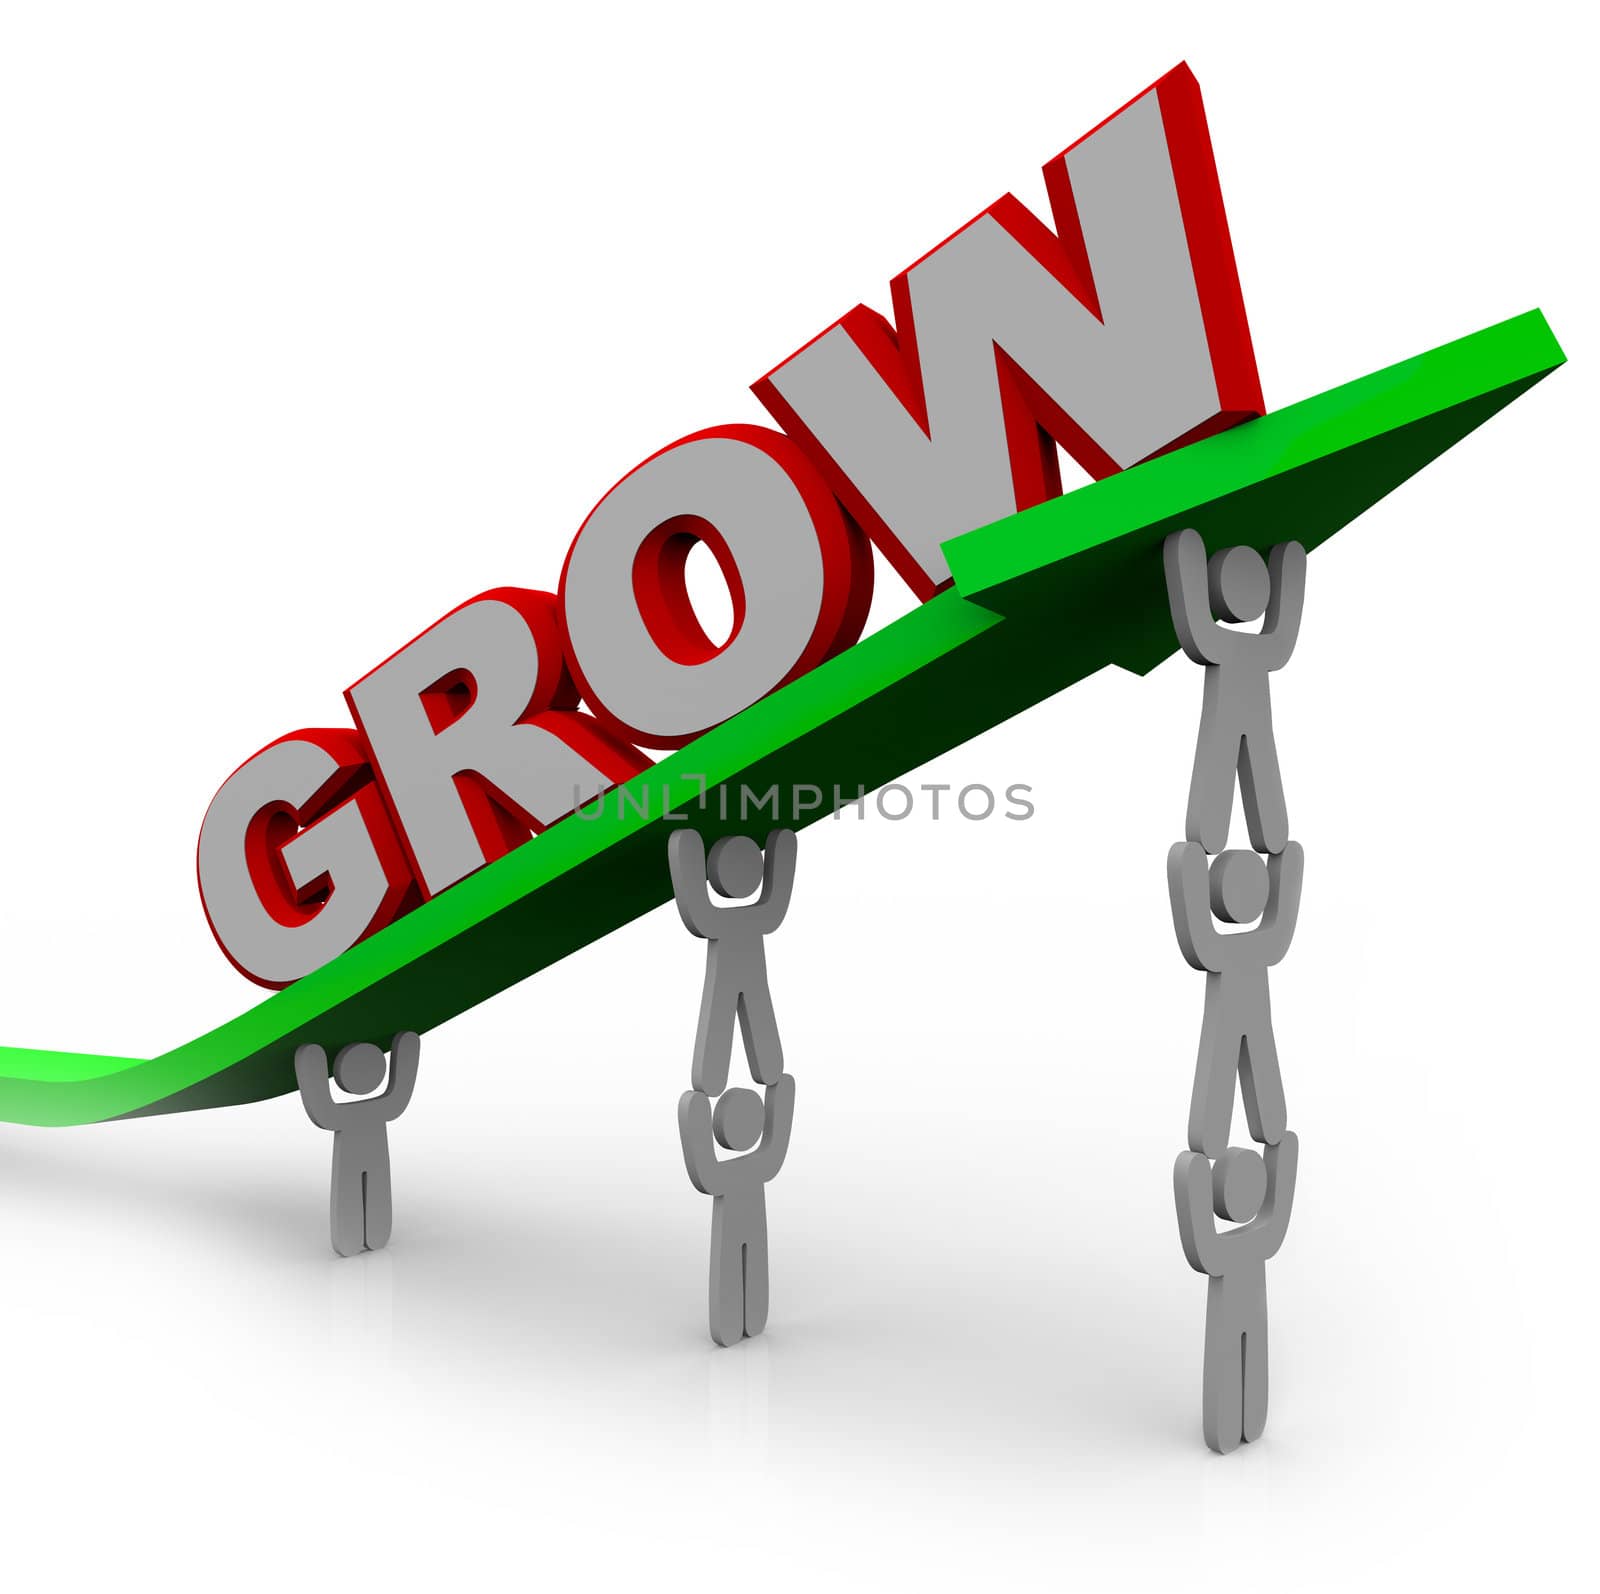 A team of people lift an arrow and the word Grow, symbolizing the growth that can be achieved with many team members working toward a common objective